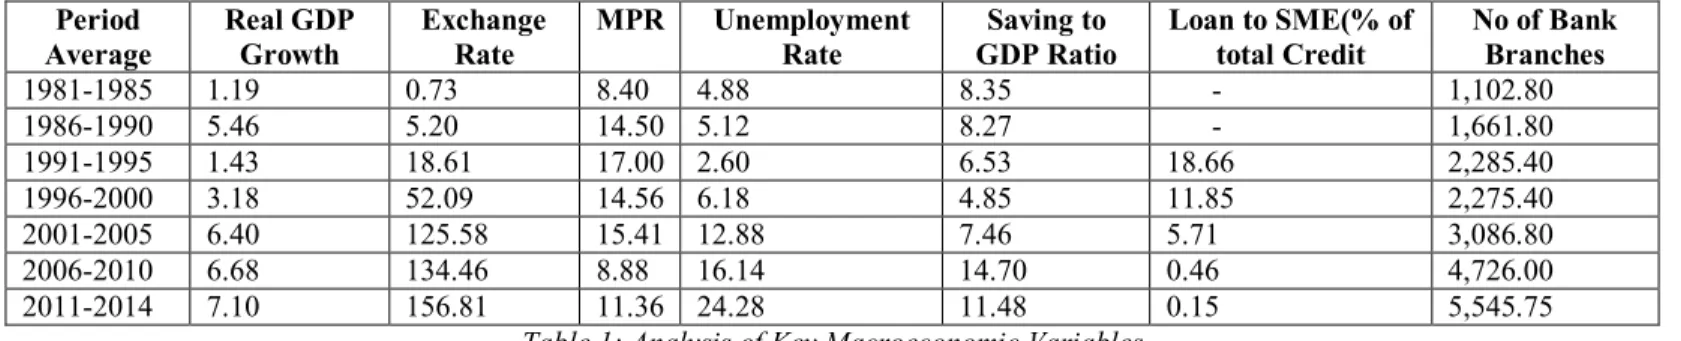 Table 1: Analysis of Key Macroeconomic Variables  Source: Adapted from Adeleke et al. 2015 